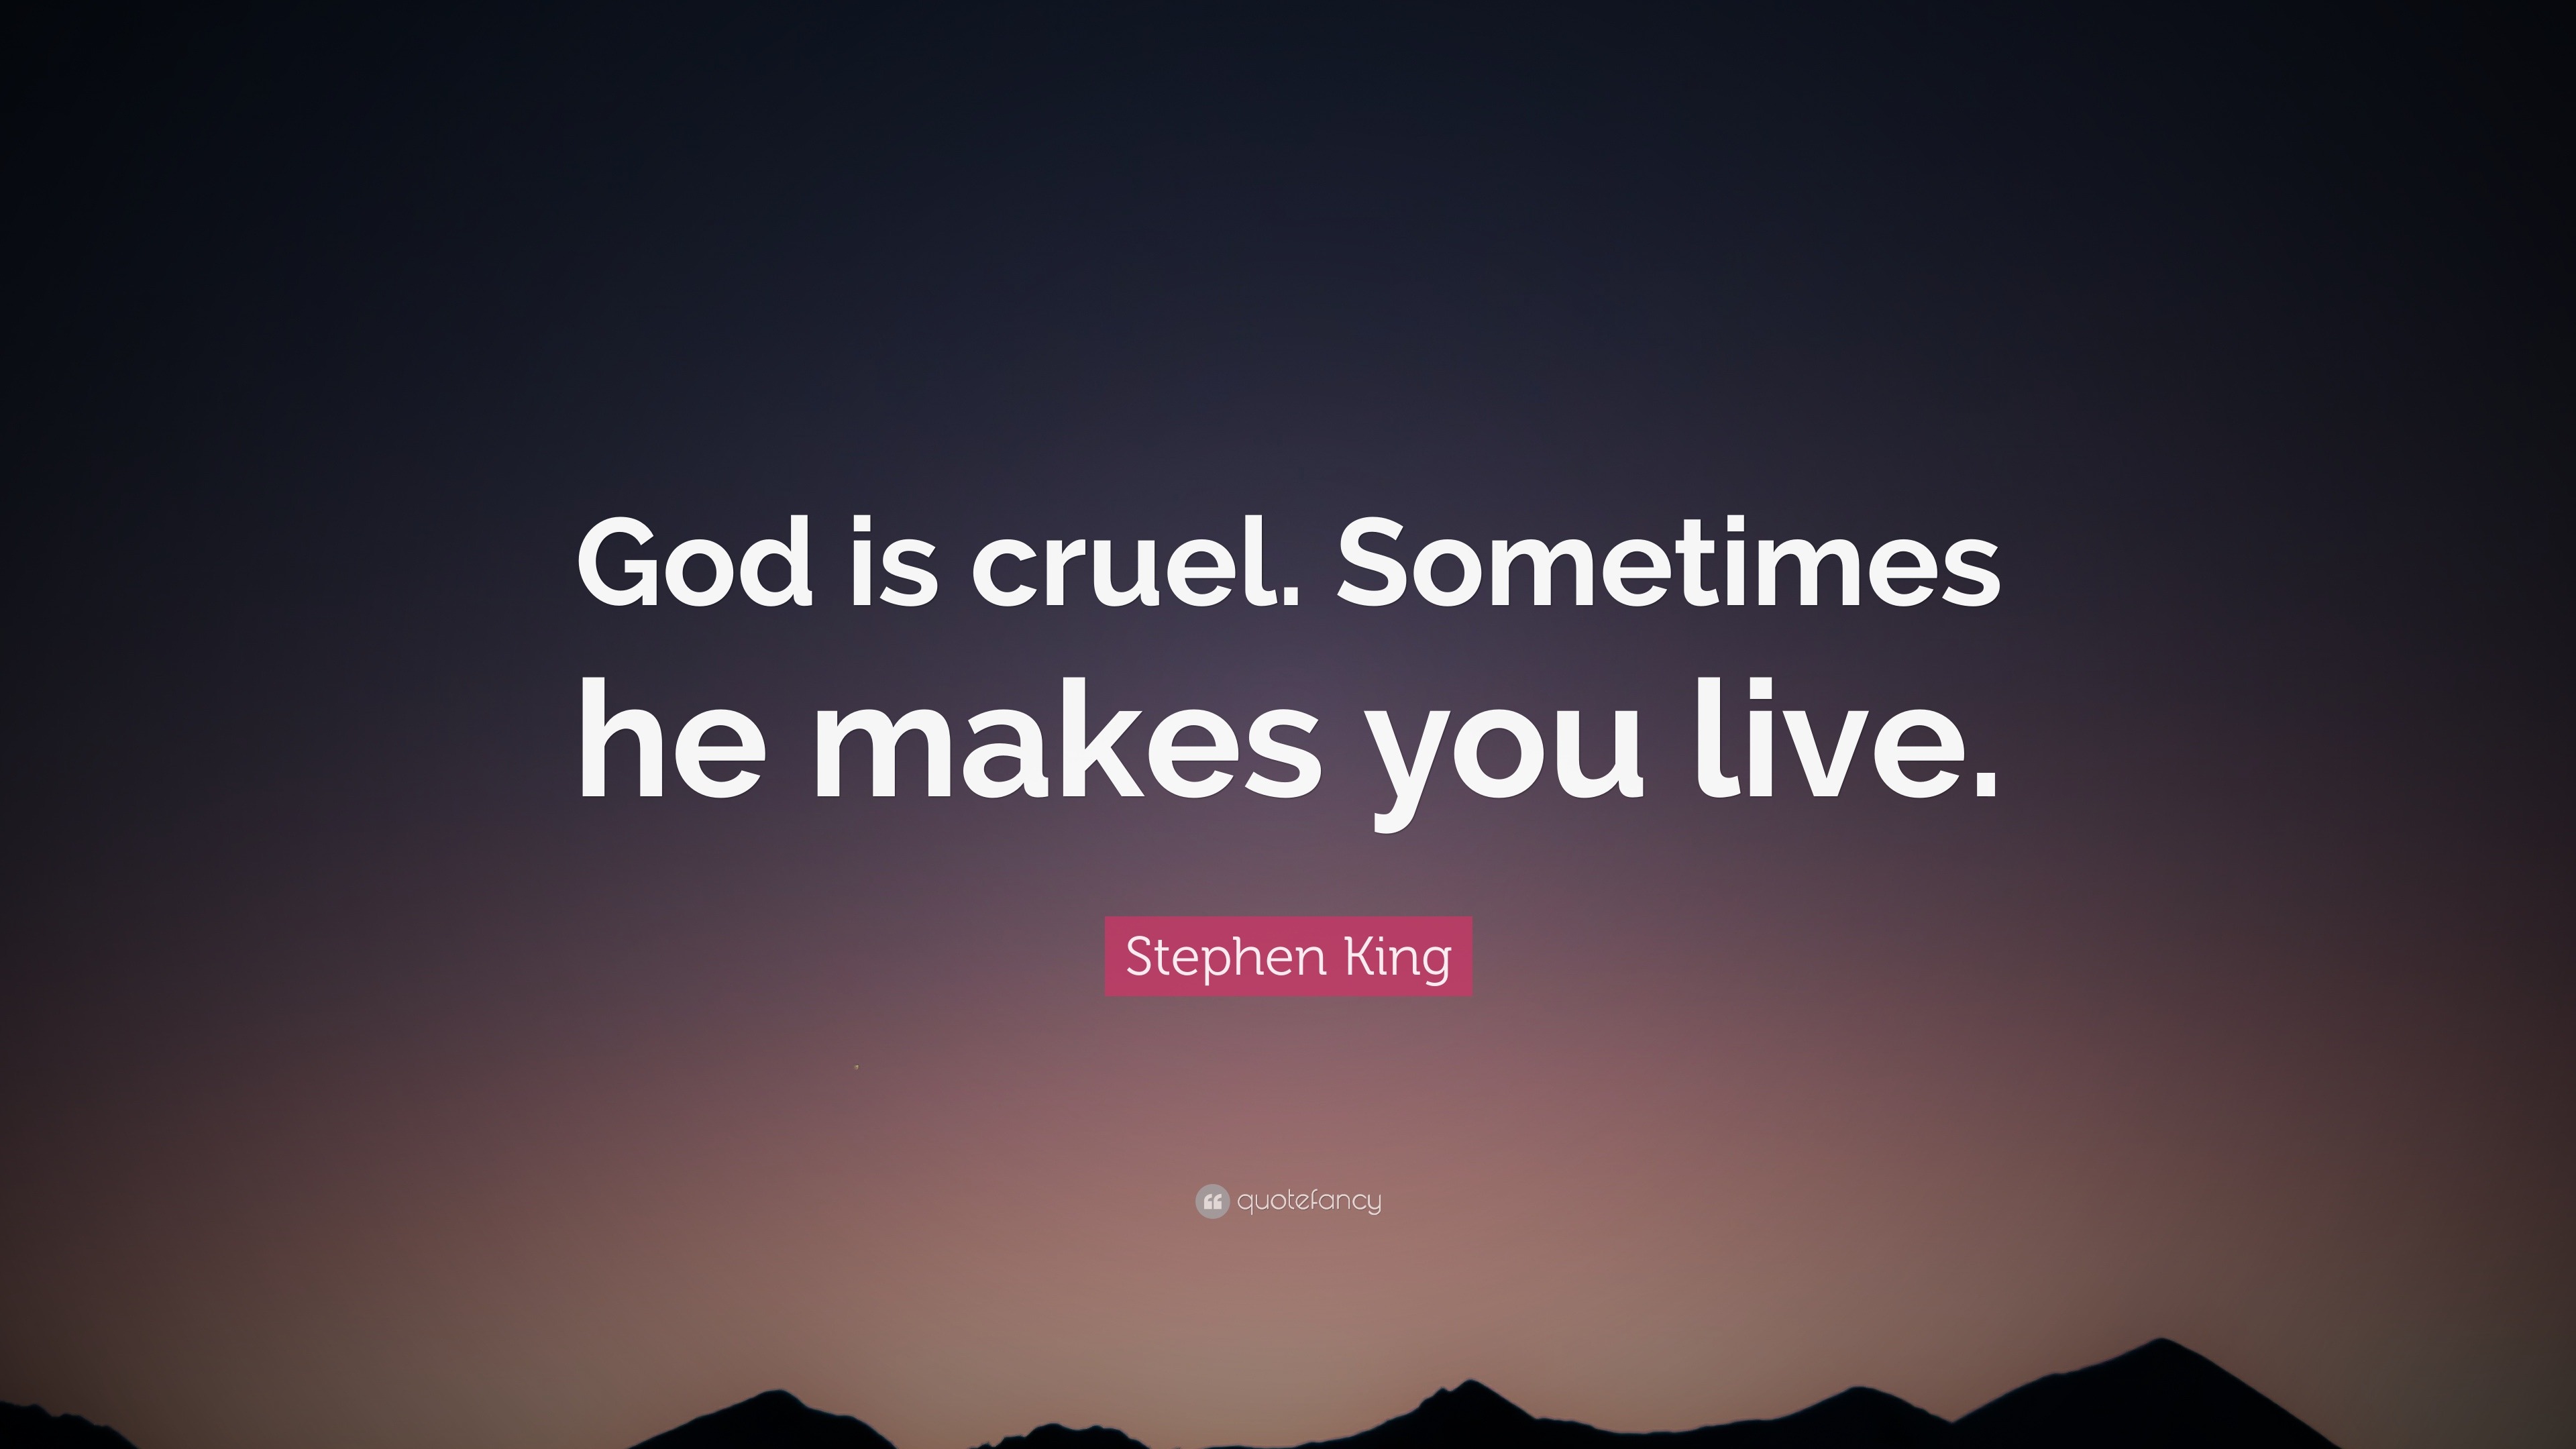 Stephen King Quote: “God is cruel. Sometimes he makes you live.”